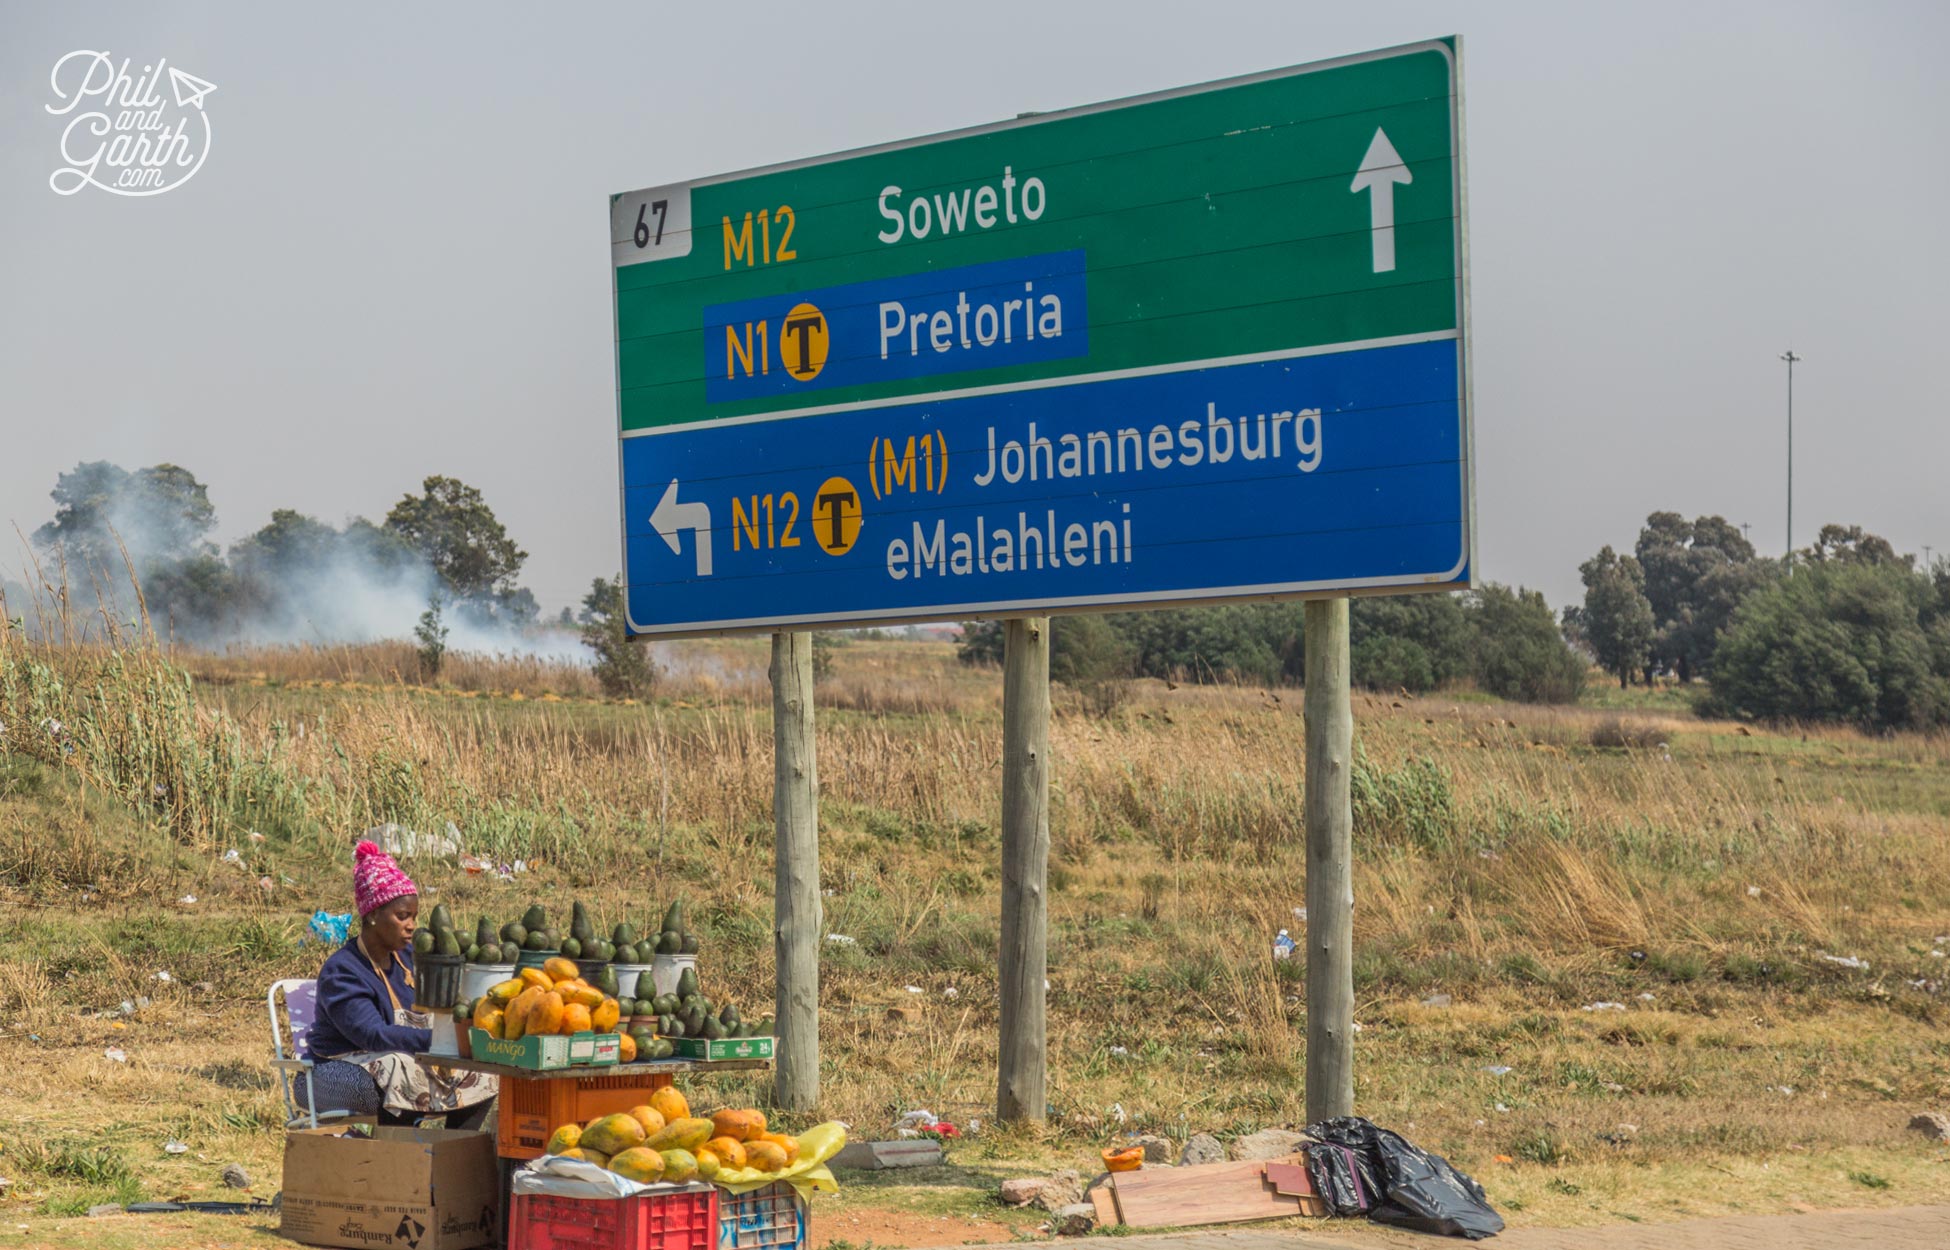 We saw loads of people selling fruit and vegetables on the sides of roads